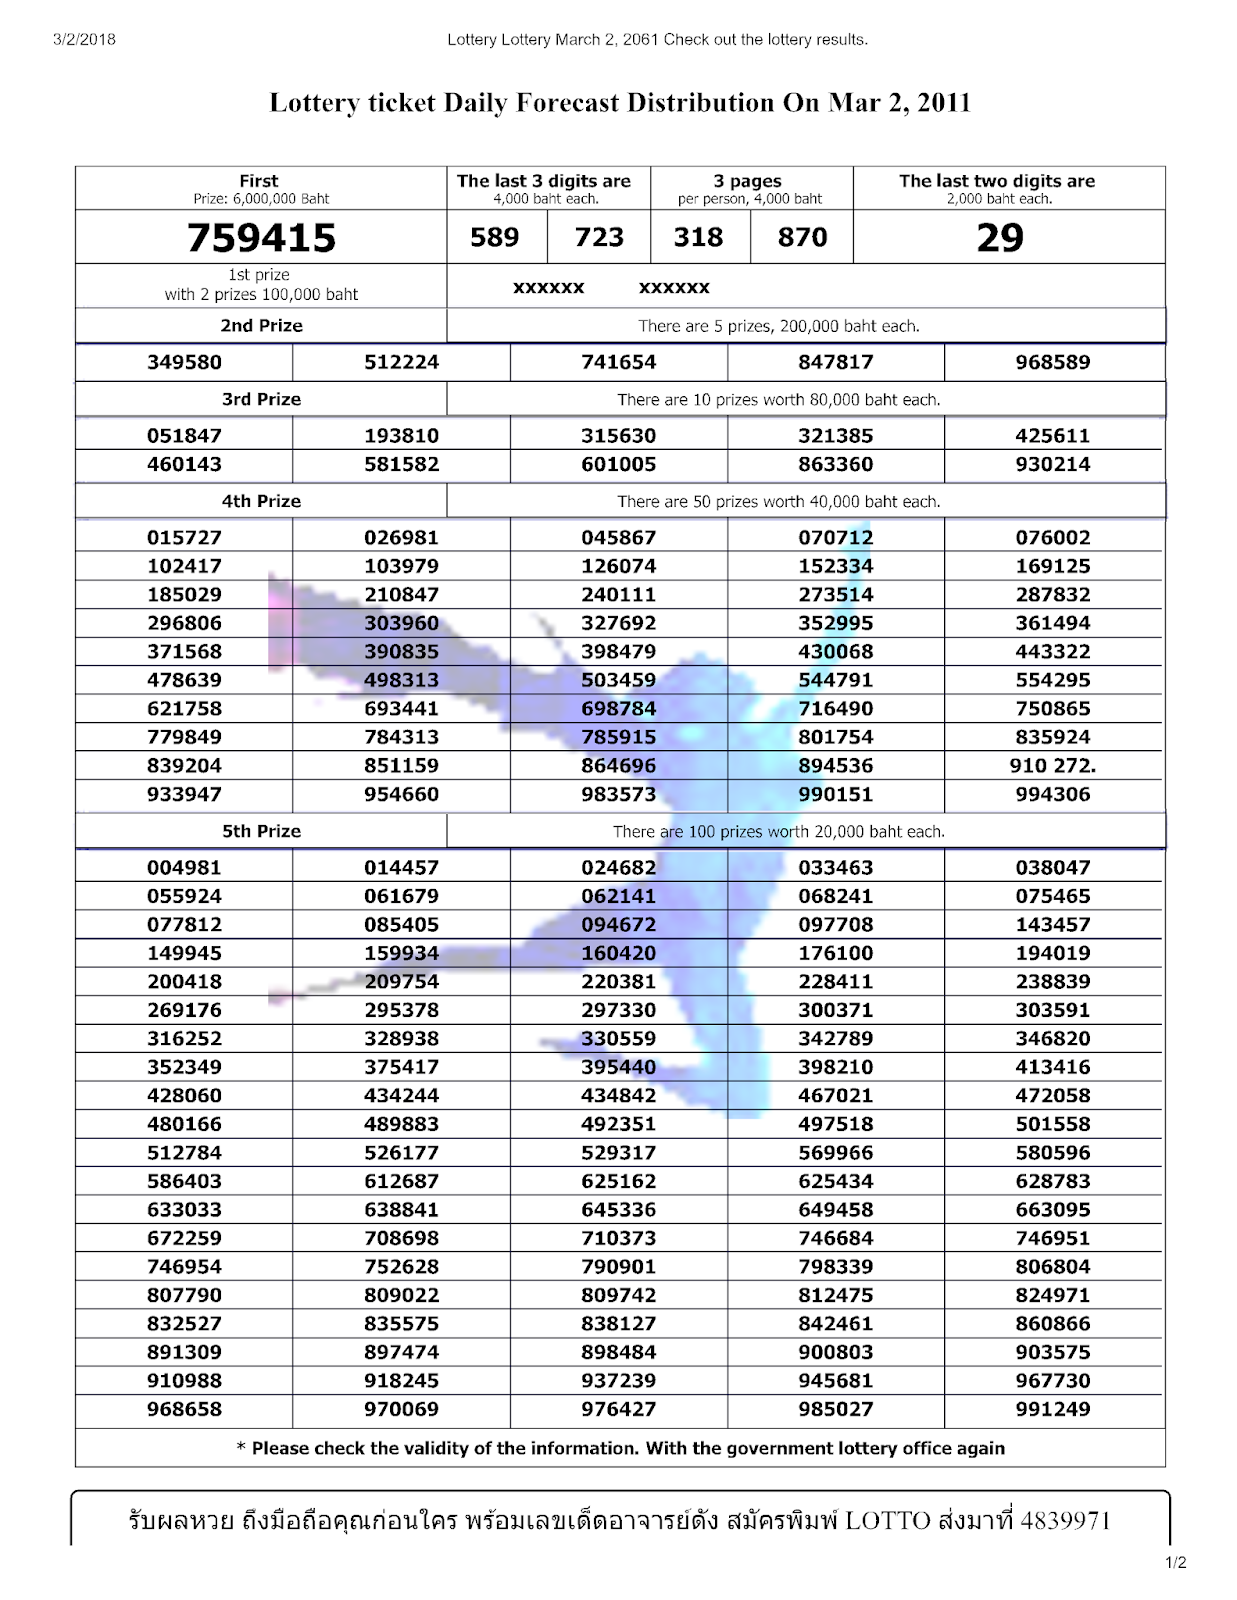 Thai Lottery Results 2018 Chart